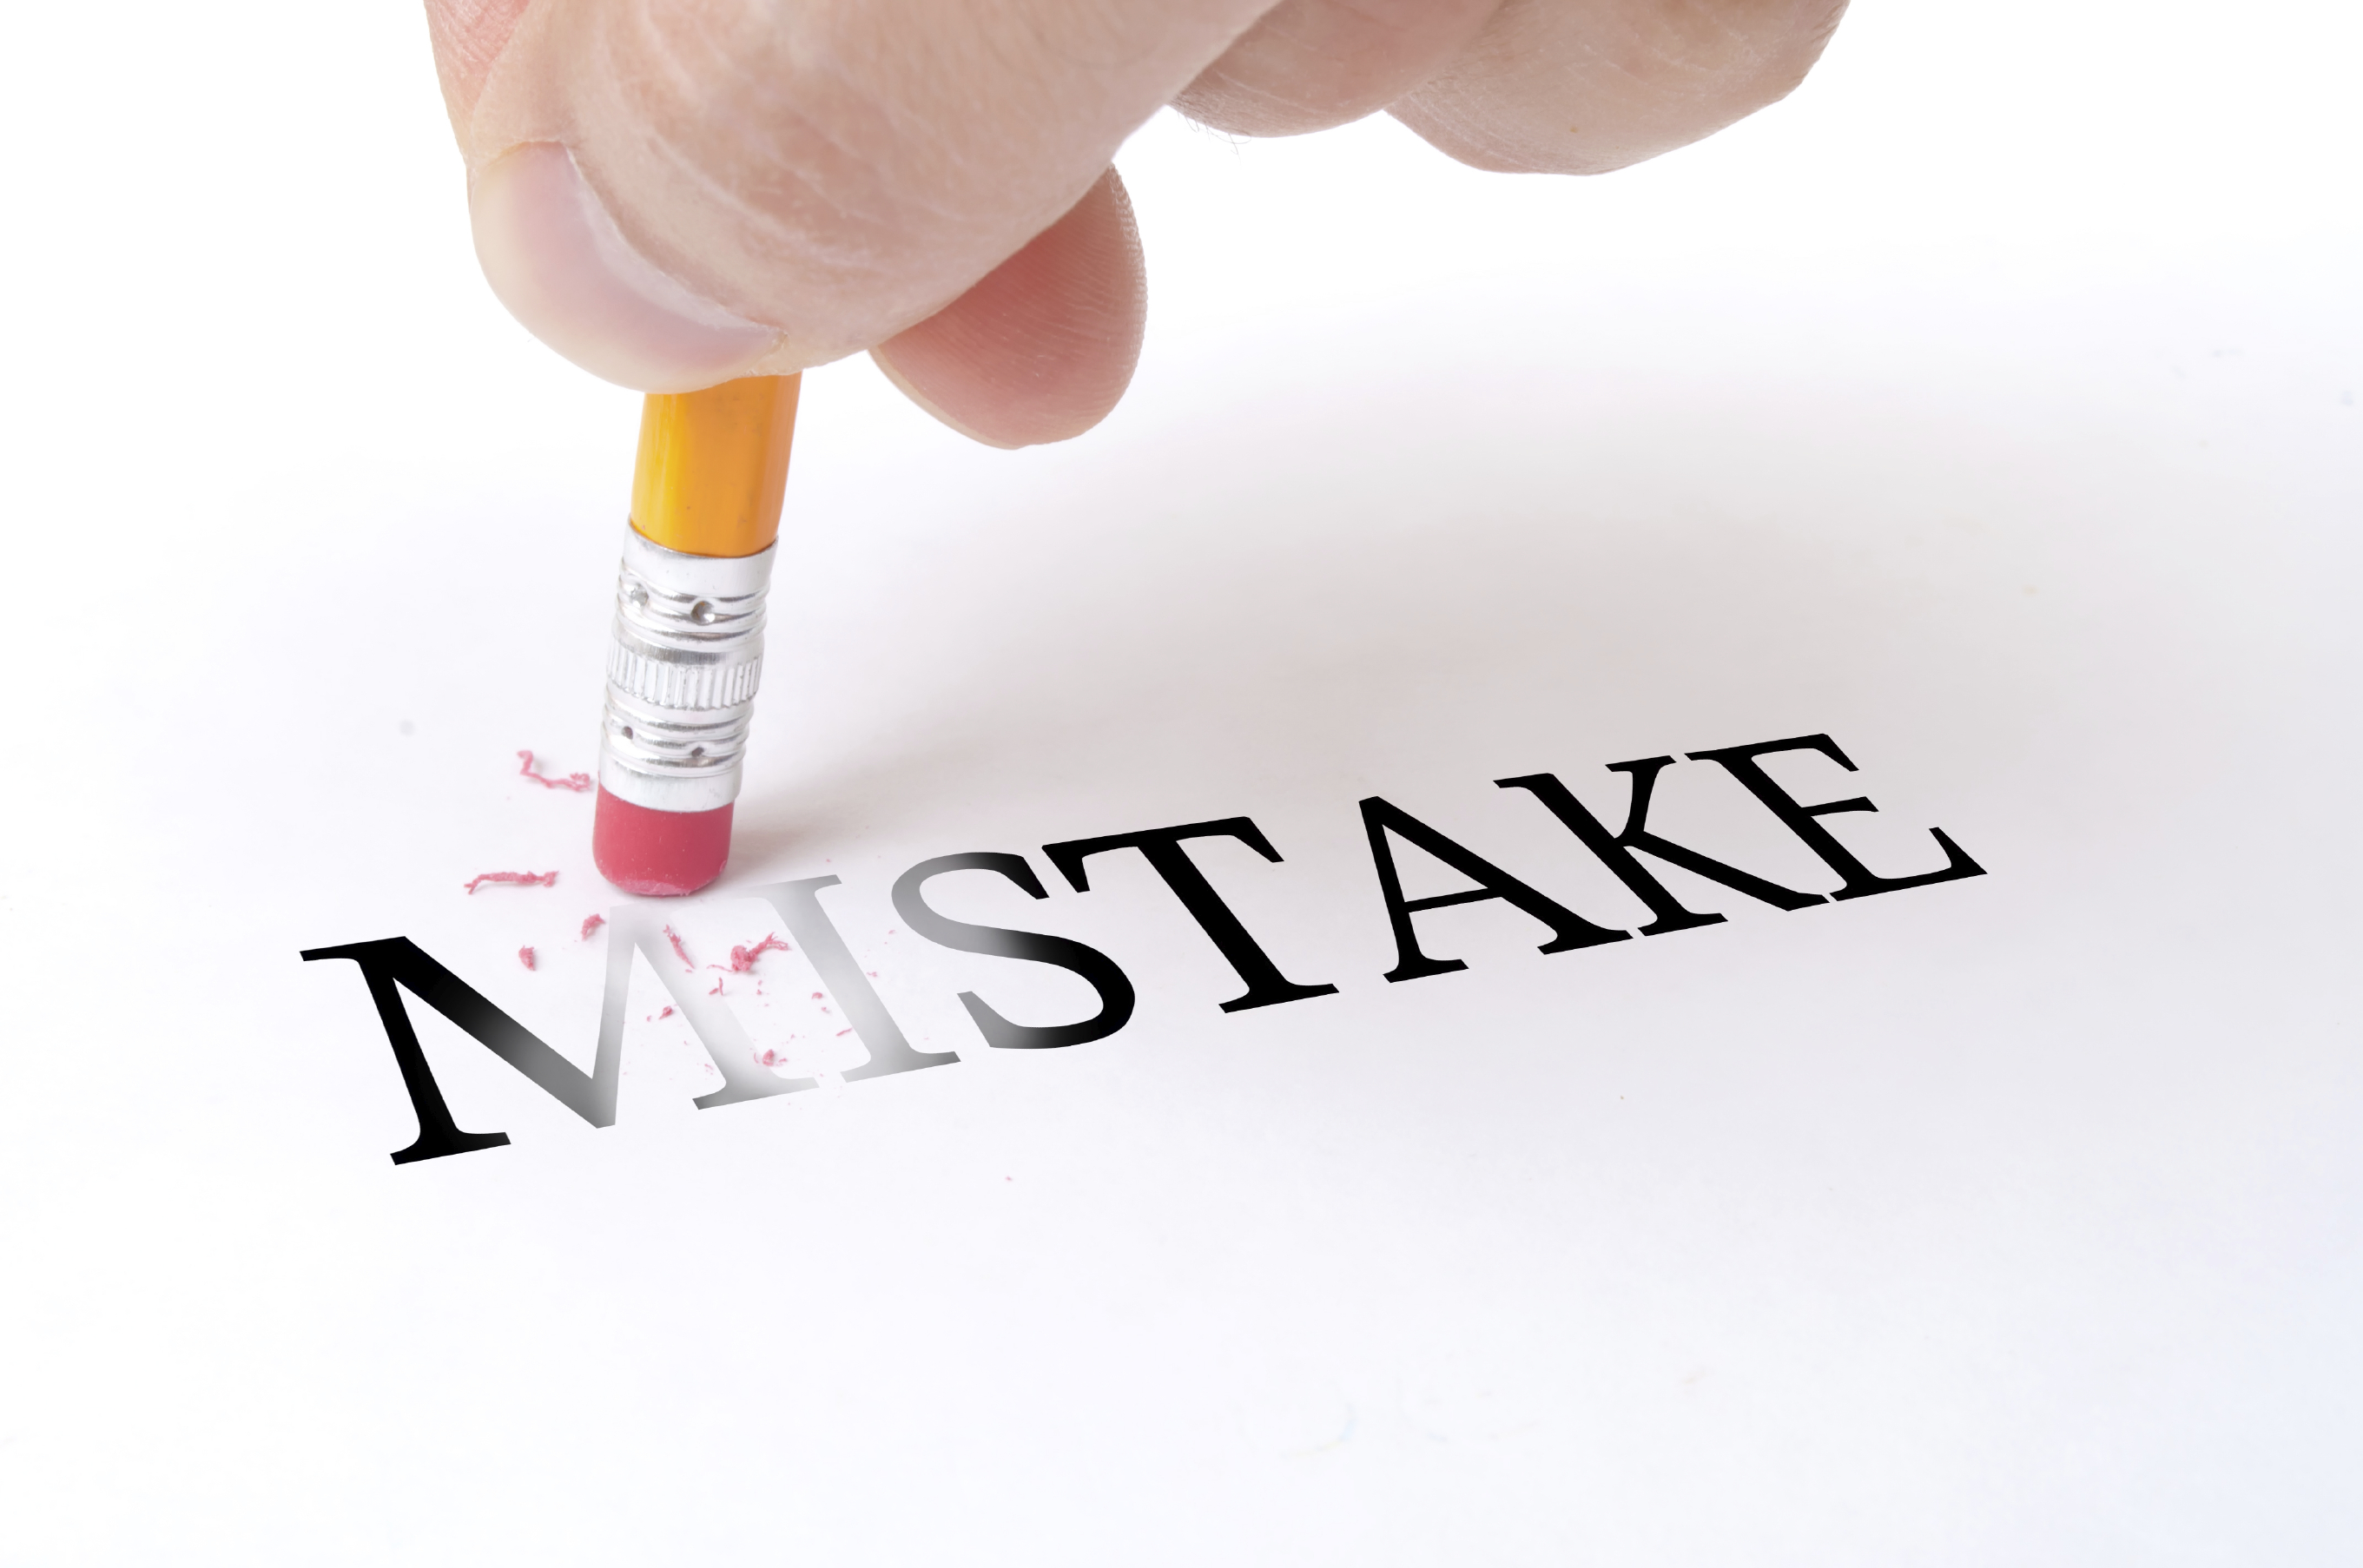 5 Big Mistakes Your Affiliate Business Should Avoid